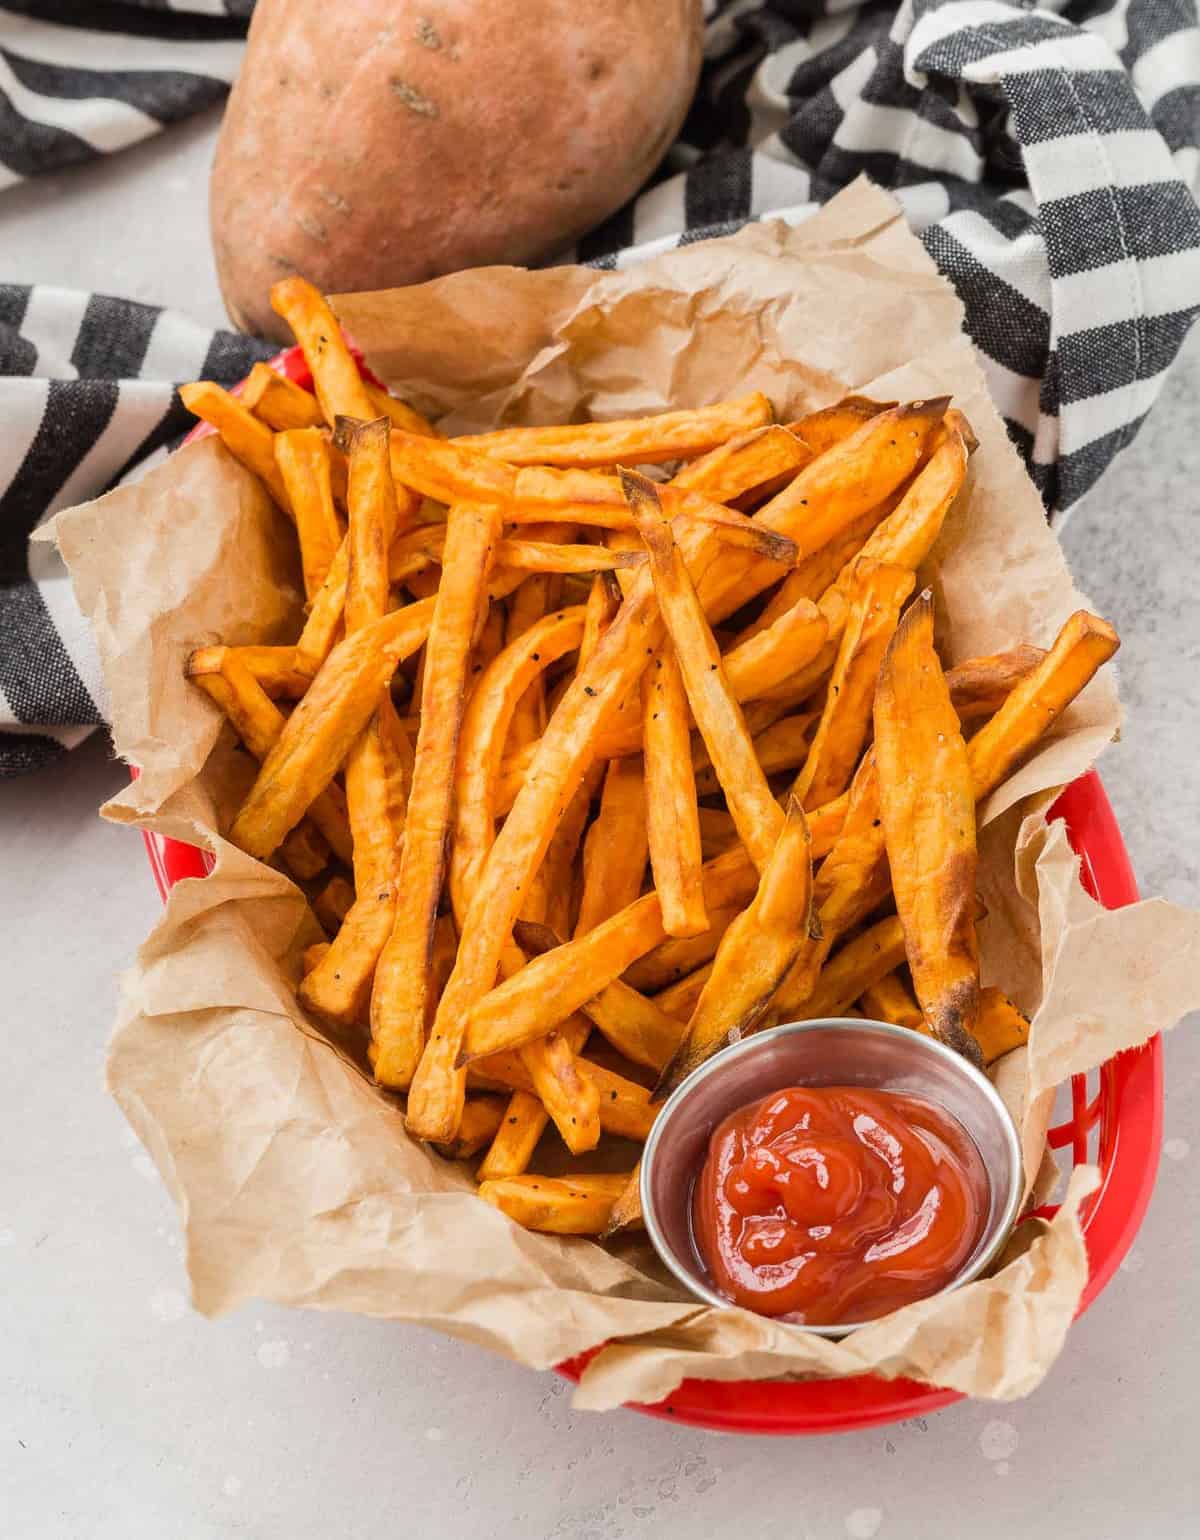 Fries in a basket with ketchup, a sweet potato in the background.